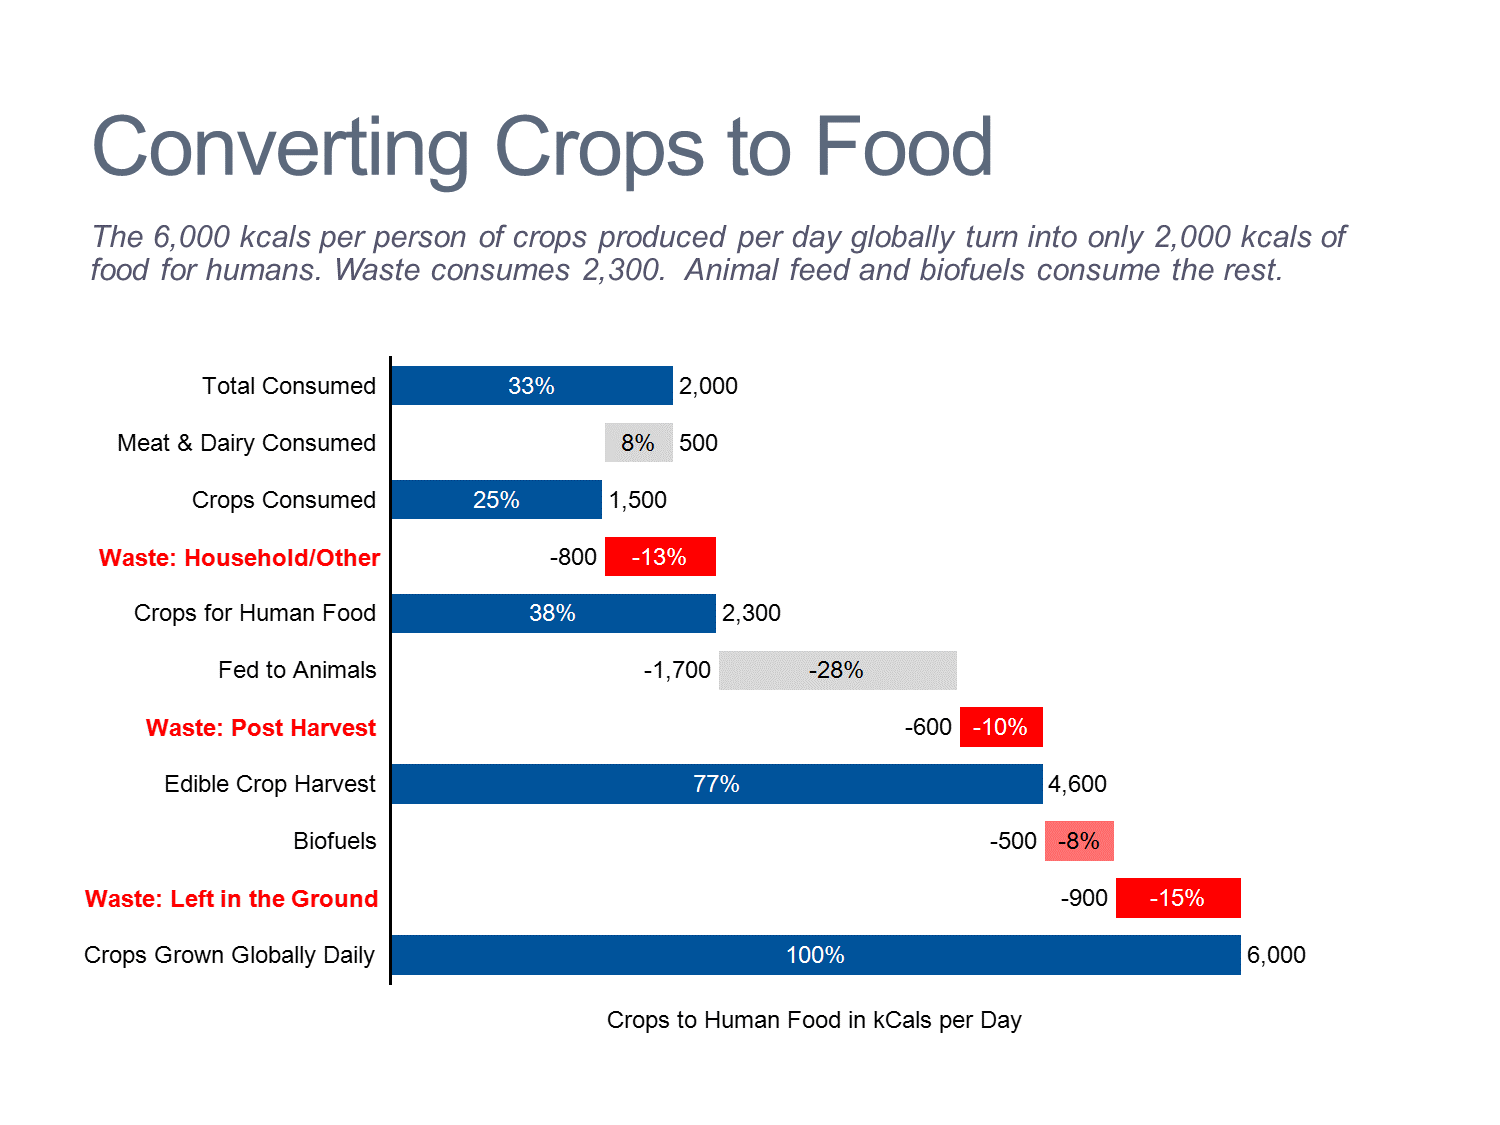 Converting Crops to Food Cascade/Waterfall Chart